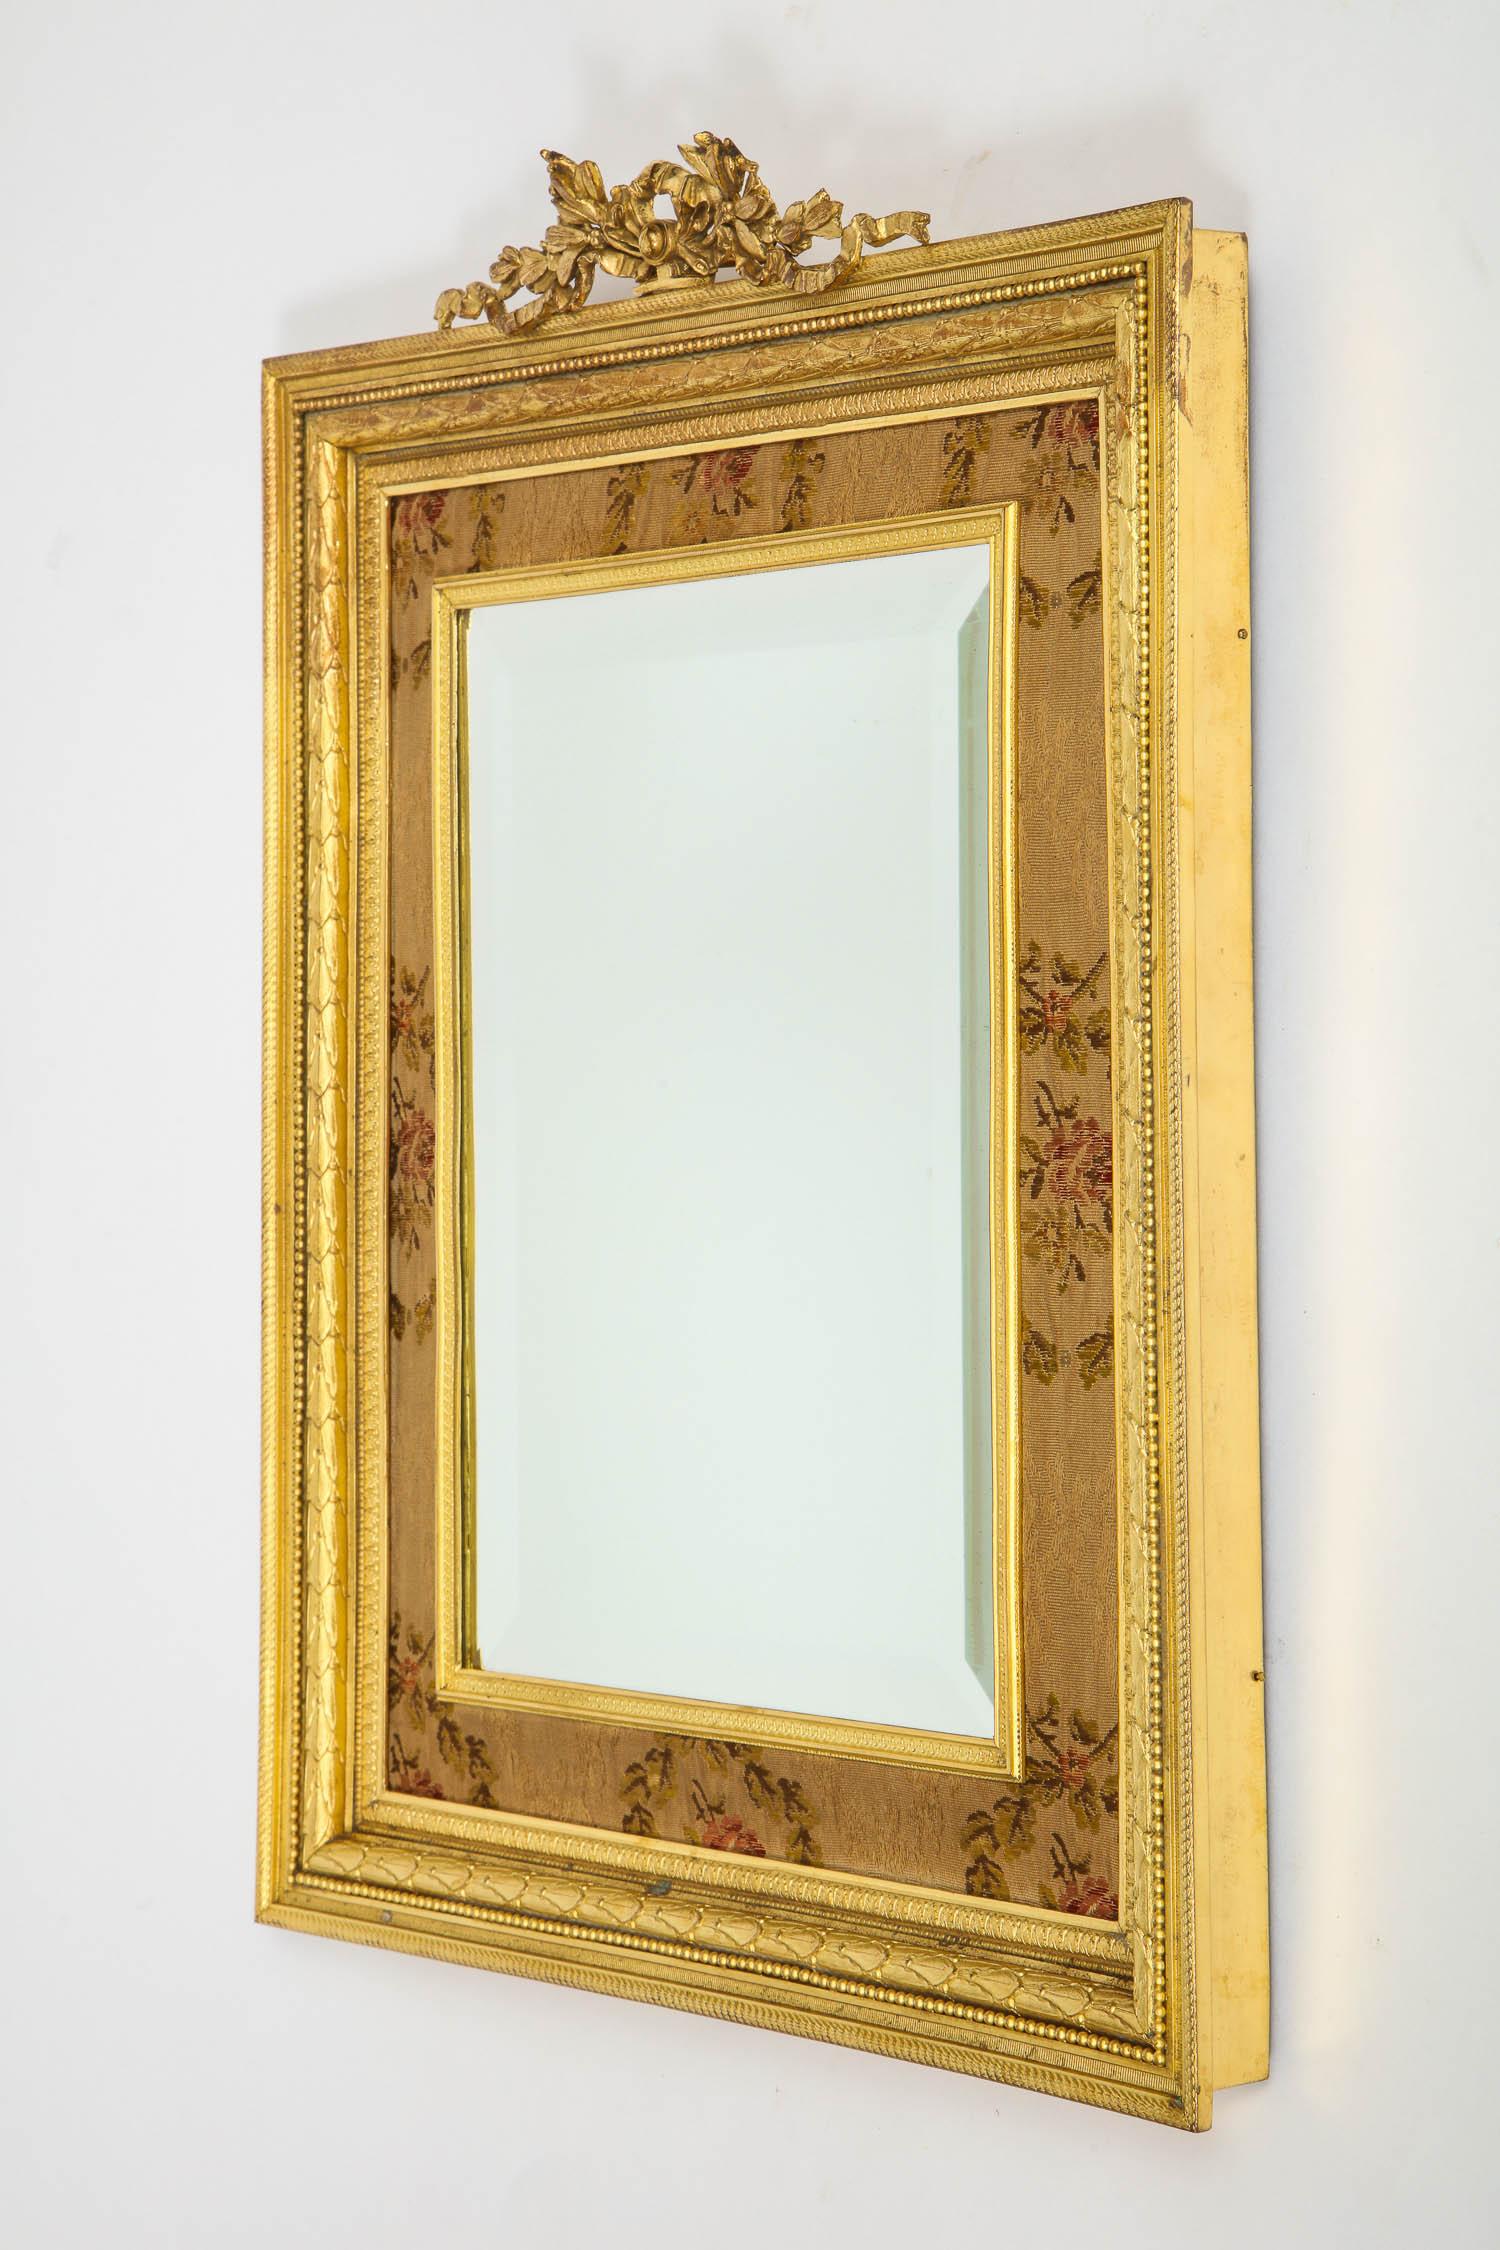 A large French gilt bronze ormolu mirror frame with easel, circa 1895

Very good quality, very good condition.

With velvet surrounding the mirror.

Measures: 15